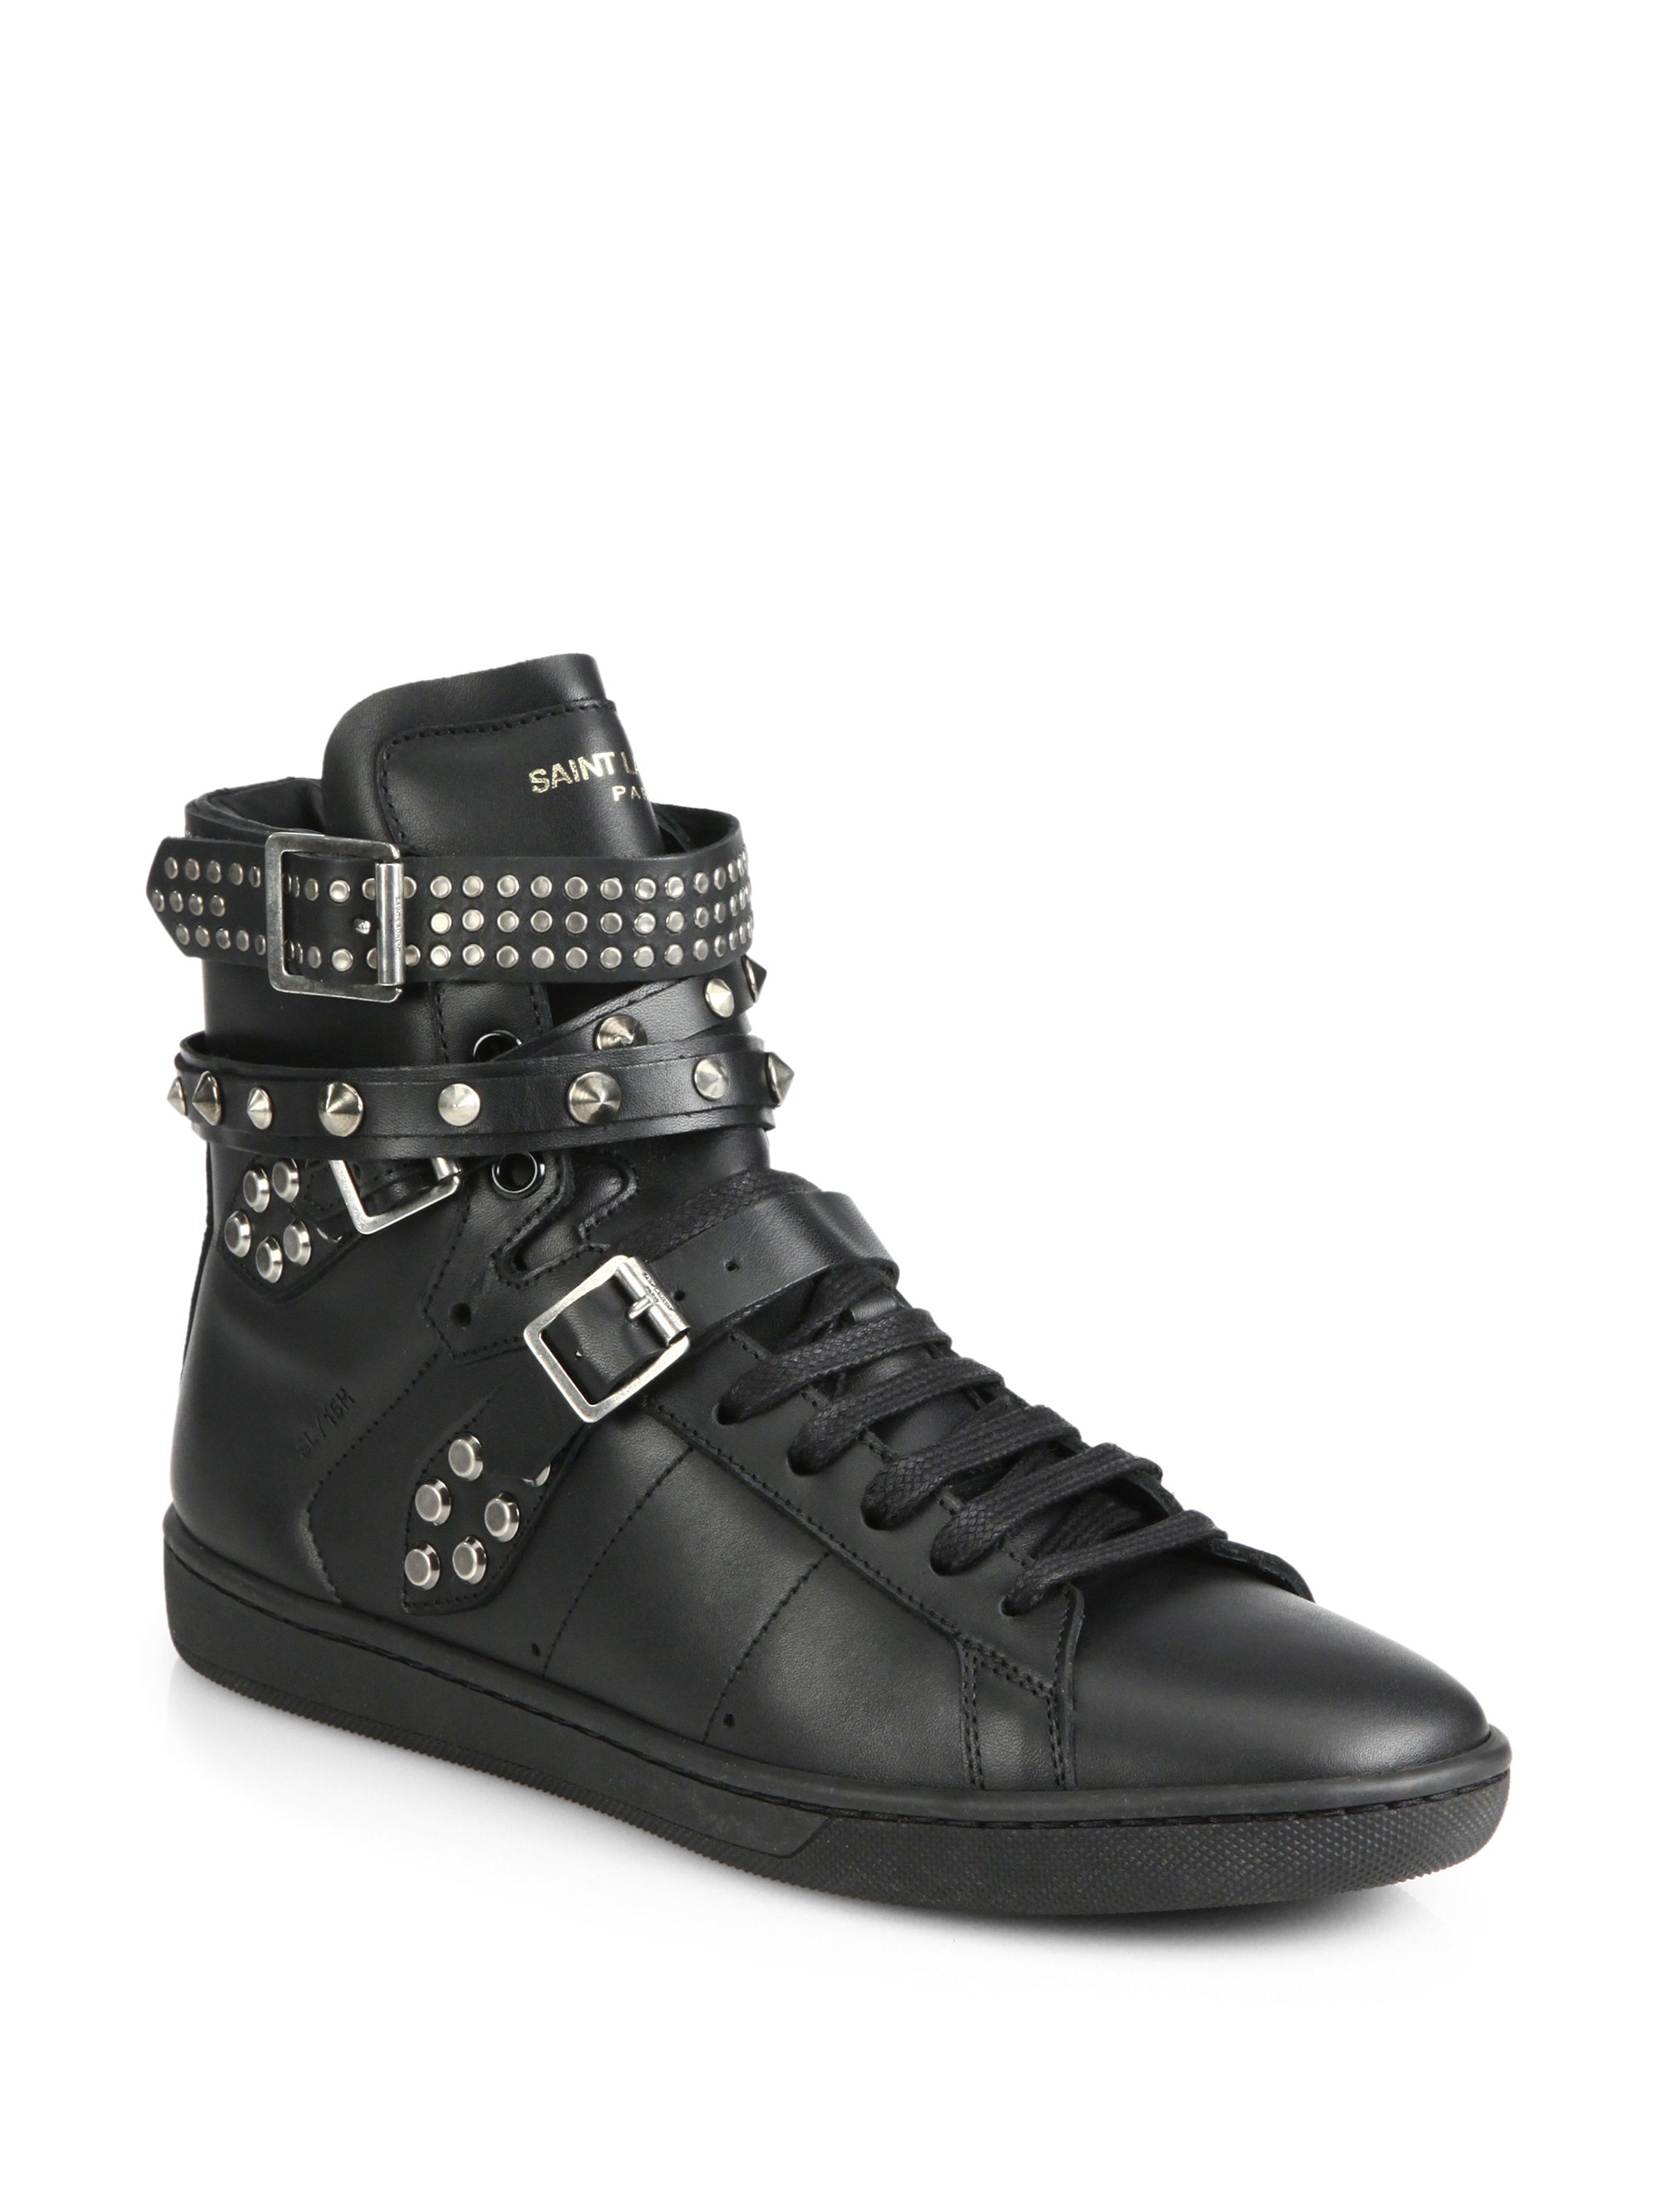 Lyst - Saint Laurent Studded Leather High-Top Sneakers in Black for Men